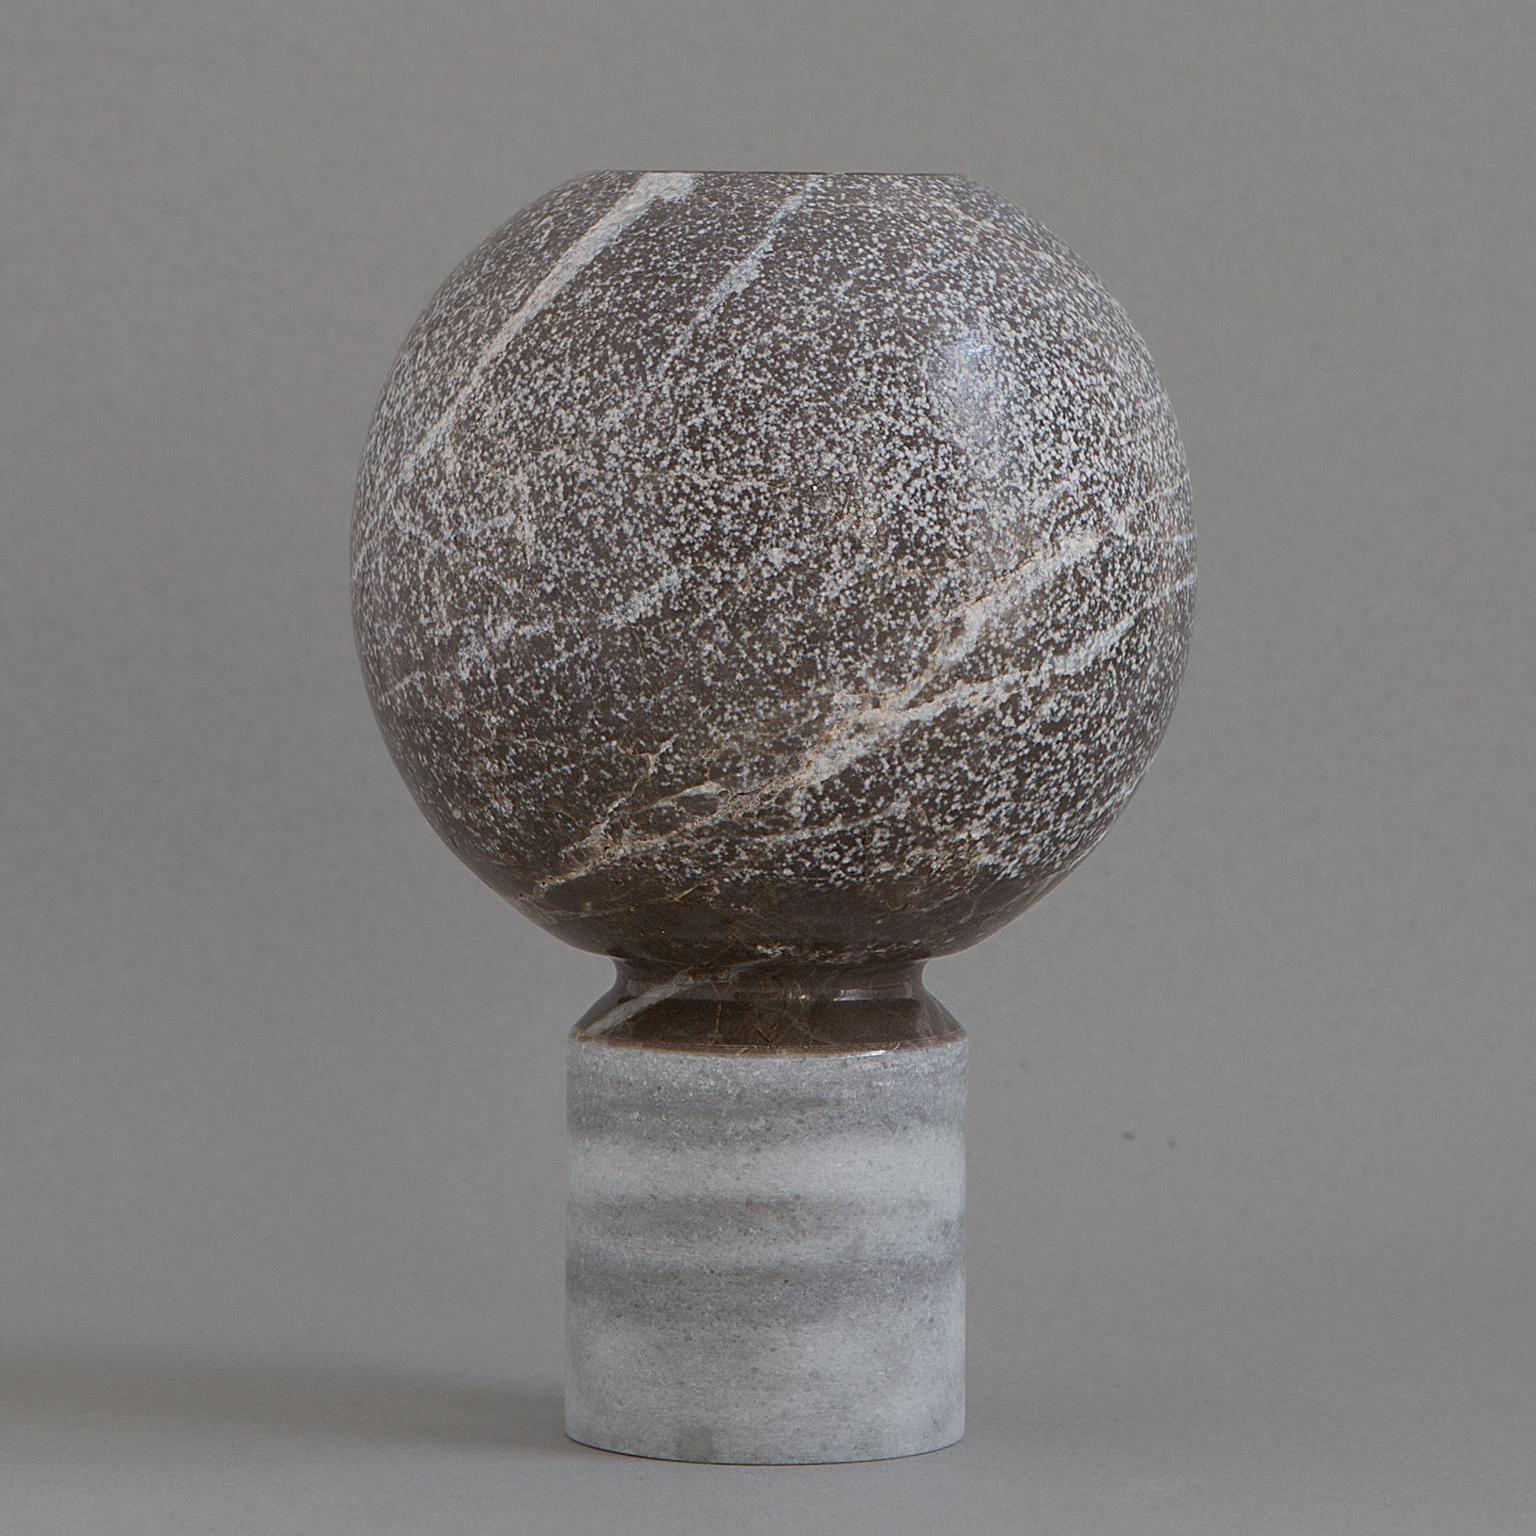 This minimalistic vase's spheric top is made from grey marble, and its base is made from dolomite. Both materials are sourced from a family-owned quarry in southern Turkey. The simplicity of form, pureness of the natural material and beauty of